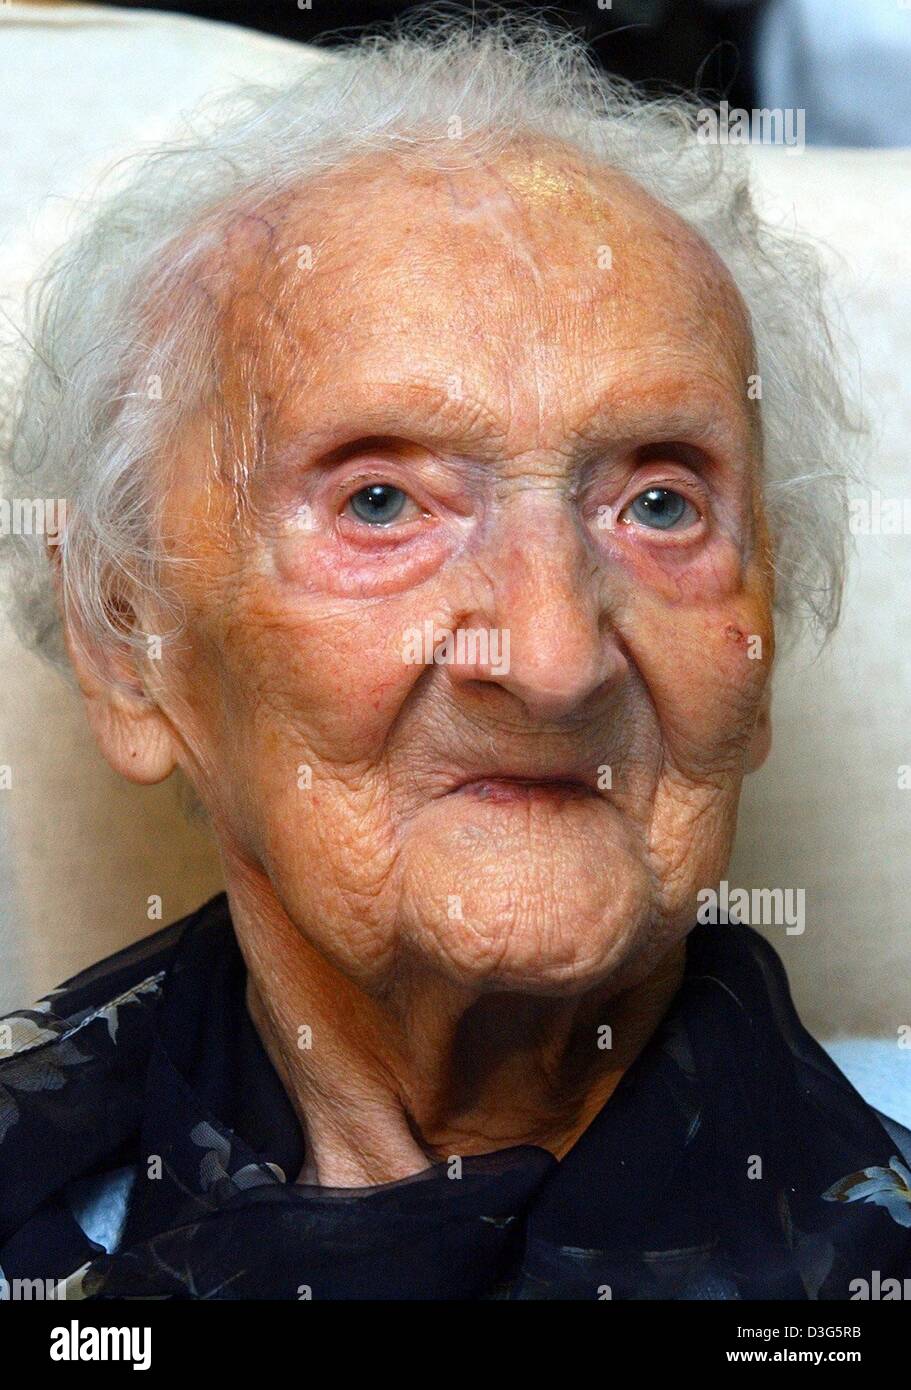 (dpa) - Retiree Gisela Metreweli is the oldest citizen of Bavaria, pictured in Ebersbach-Weichs, Germany, 10 October 2003. She is 110 years old. Stock Photo